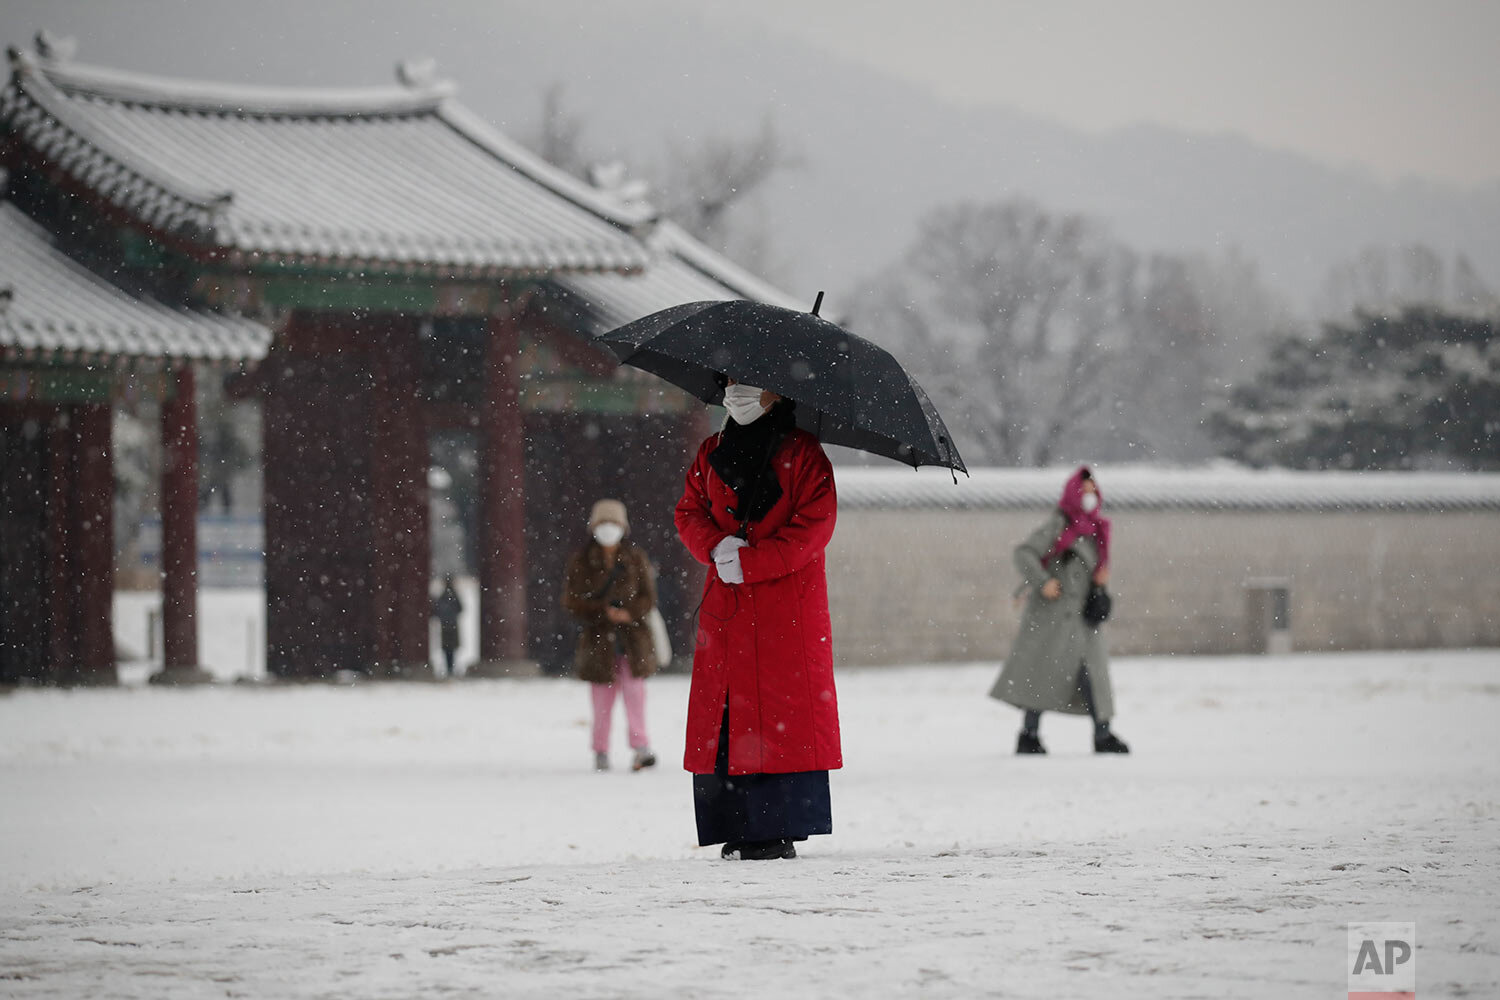  An employee wearing a face mask as a precaution against the coronavirus uses an umbrella to take shelter from the snow at the Gyeongbok Palace, one of South Korea's well-known landmarks, in Seoul, South Korea, Sunday, Dec. 13, 2020. (AP Photo/Lee Ji